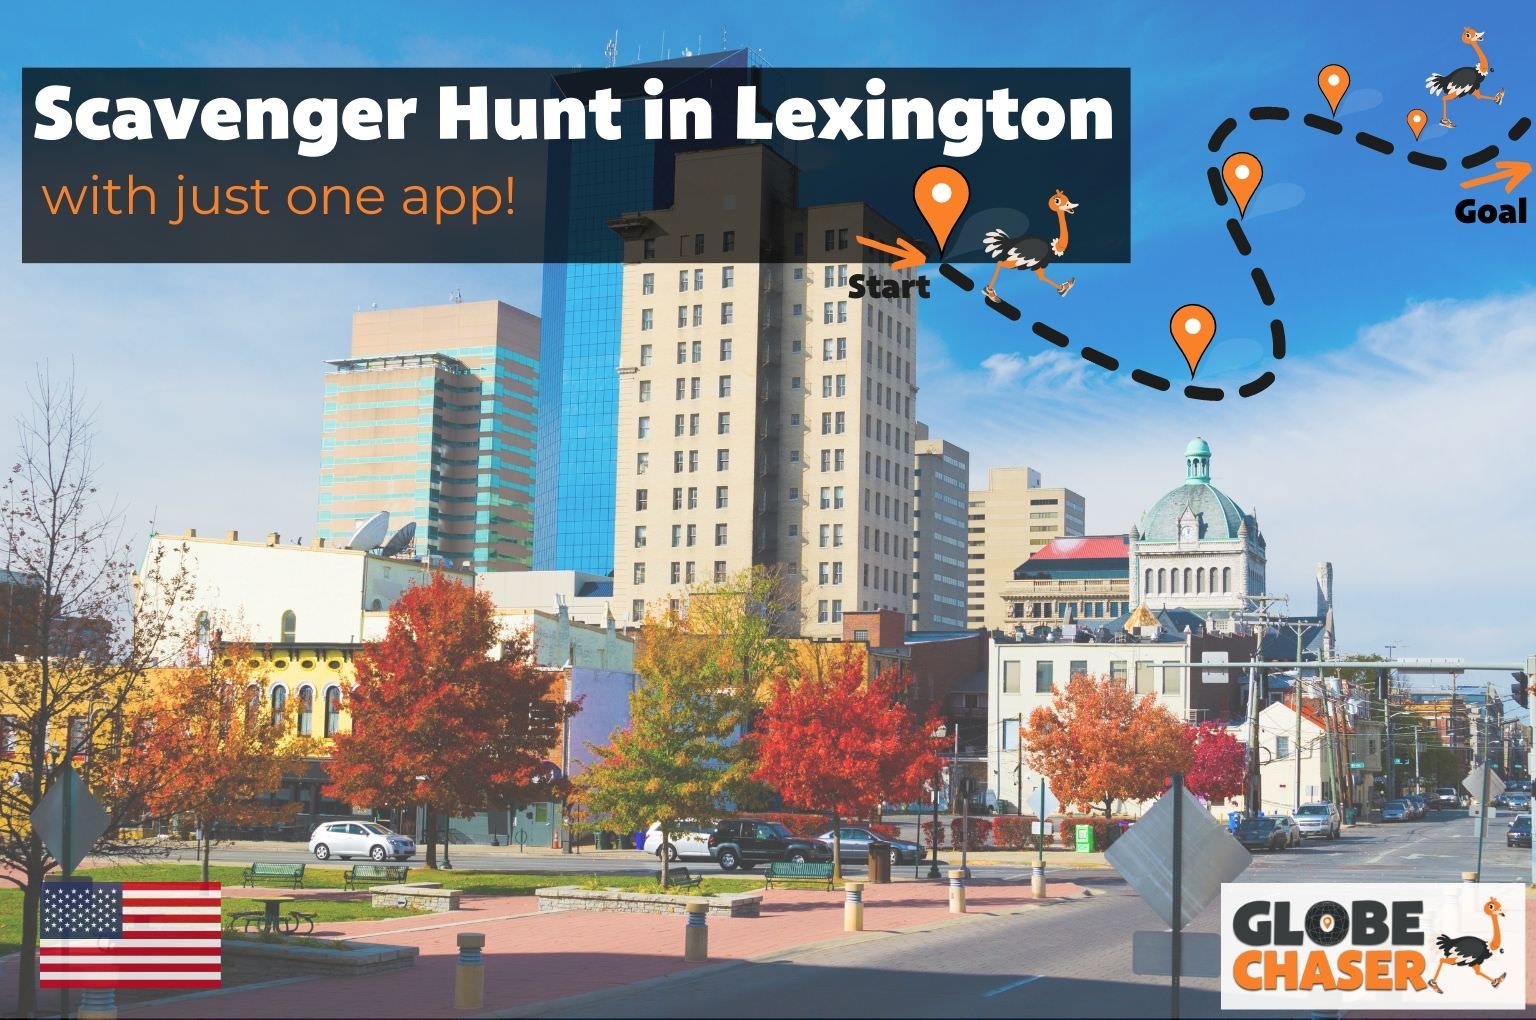 Scavenger Hunt in Lexington, USA - Family Activities with the Globe Chaser App for Outdoor Fun